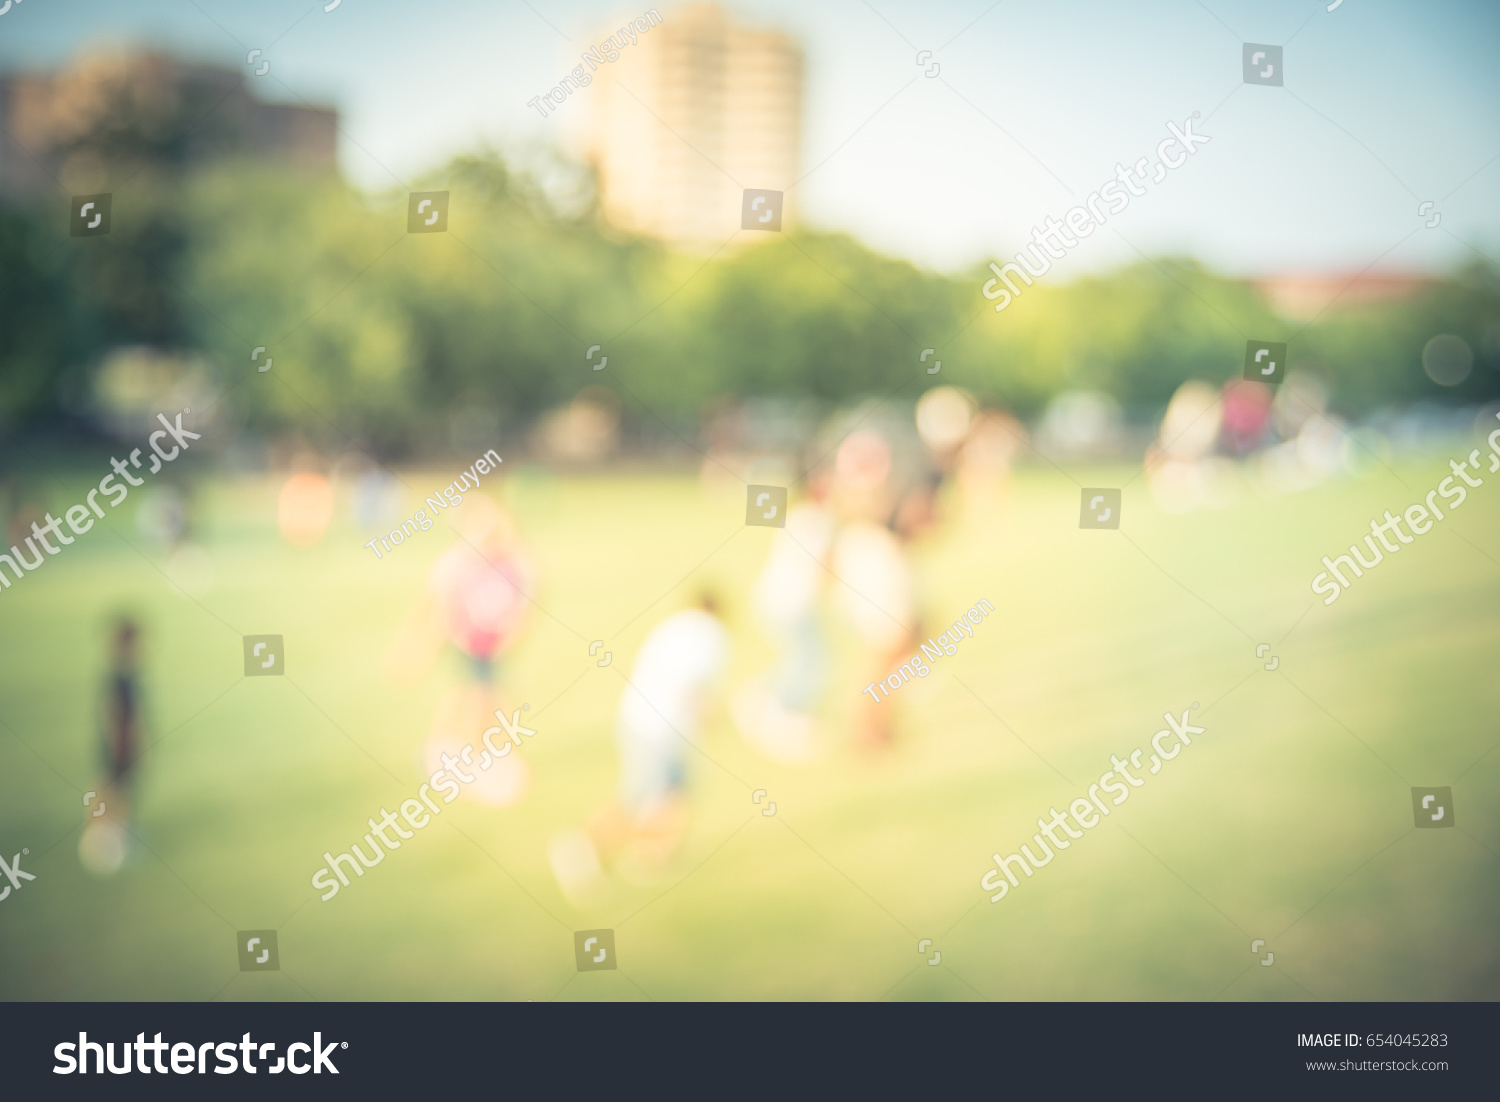 Blurred kids running, chasing each other on grass hill at sunset in summertime. Group smiling African American child running across hill urban park at Houston, Texas. Light, happy scene, vintage tone. #654045283